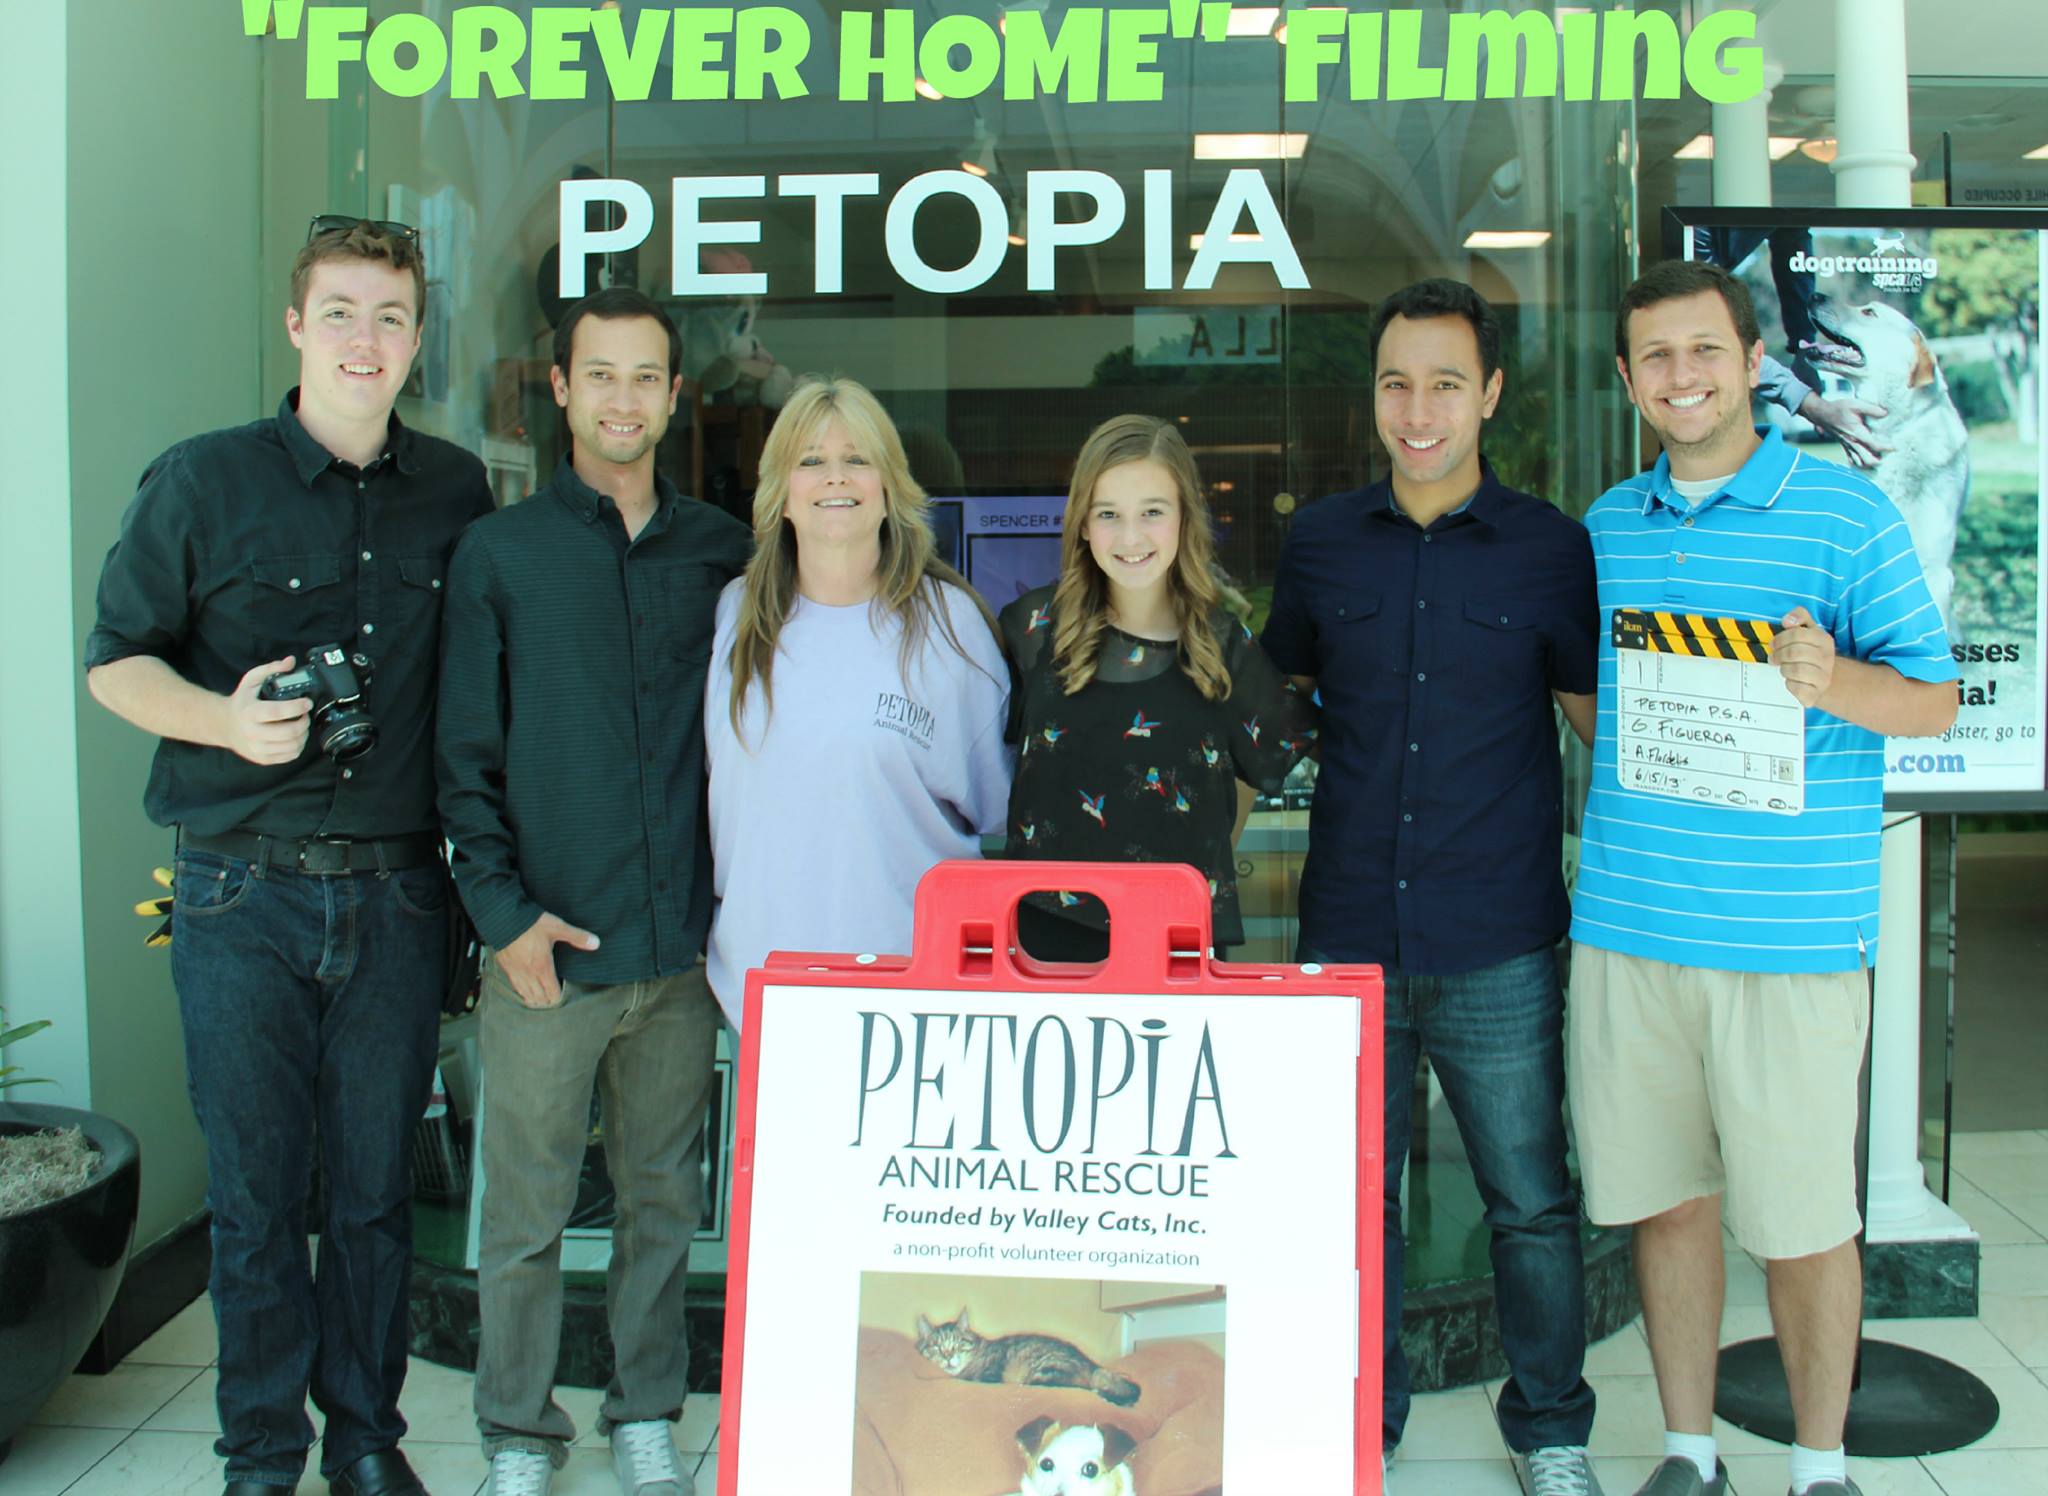 FOREVER HOME (2014) film crew and Actress, Susan Olsen. Susan Olsen is Cindy from the Brady Bunch and an animal welfare advocate. PSA film produced and written by Christine-Marie Johnnie.